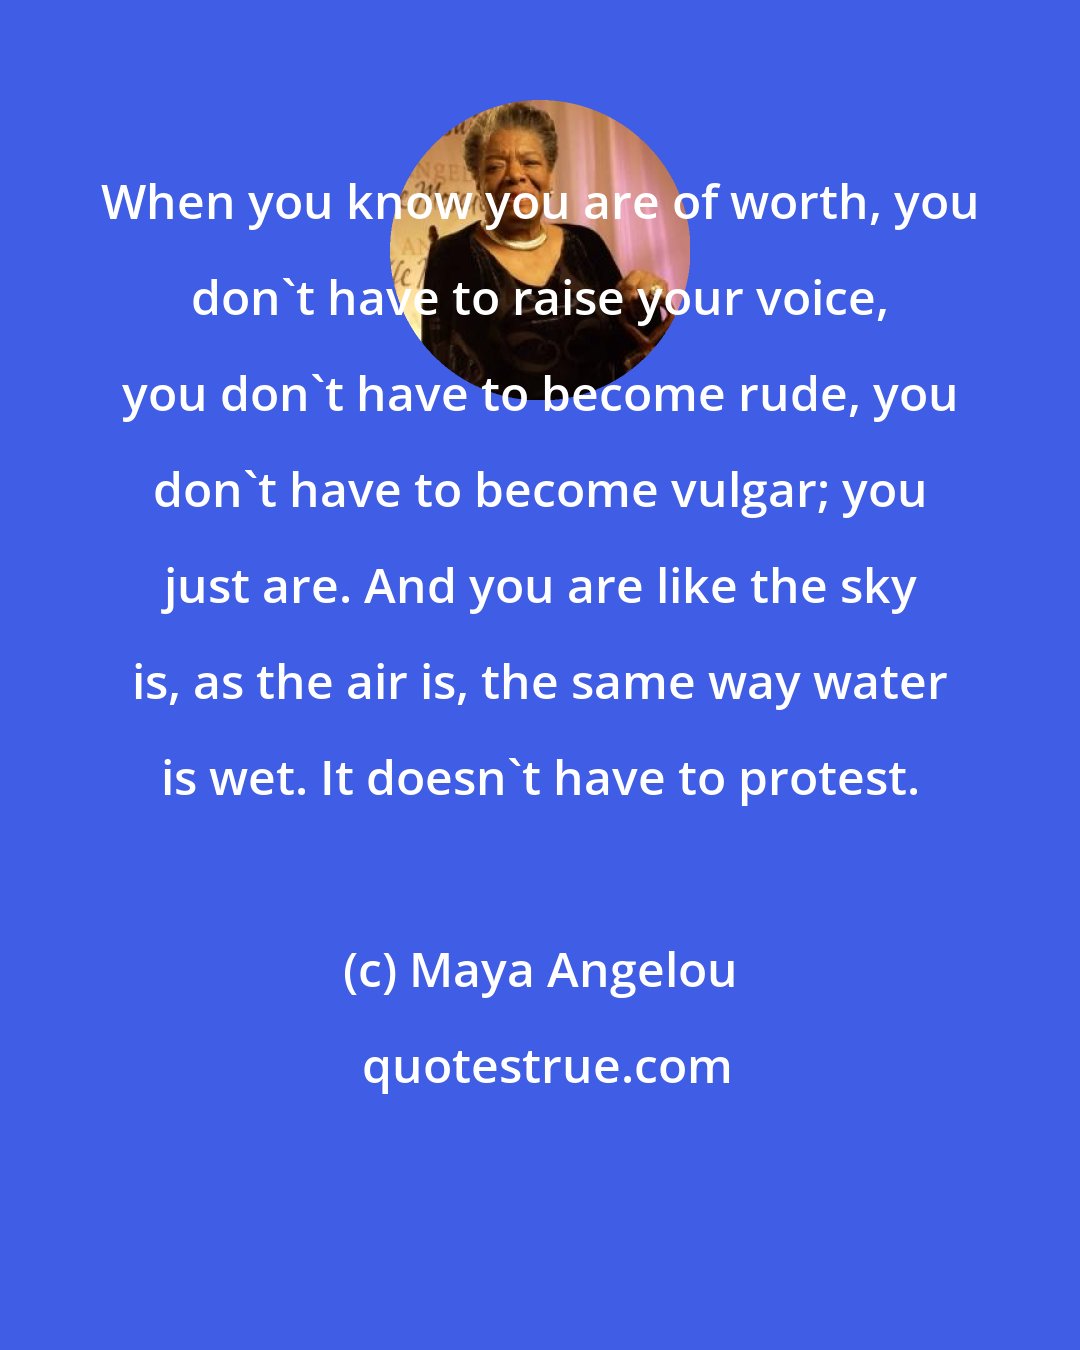 Maya Angelou: When you know you are of worth, you don't have to raise your voice, you don't have to become rude, you don't have to become vulgar; you just are. And you are like the sky is, as the air is, the same way water is wet. It doesn't have to protest.